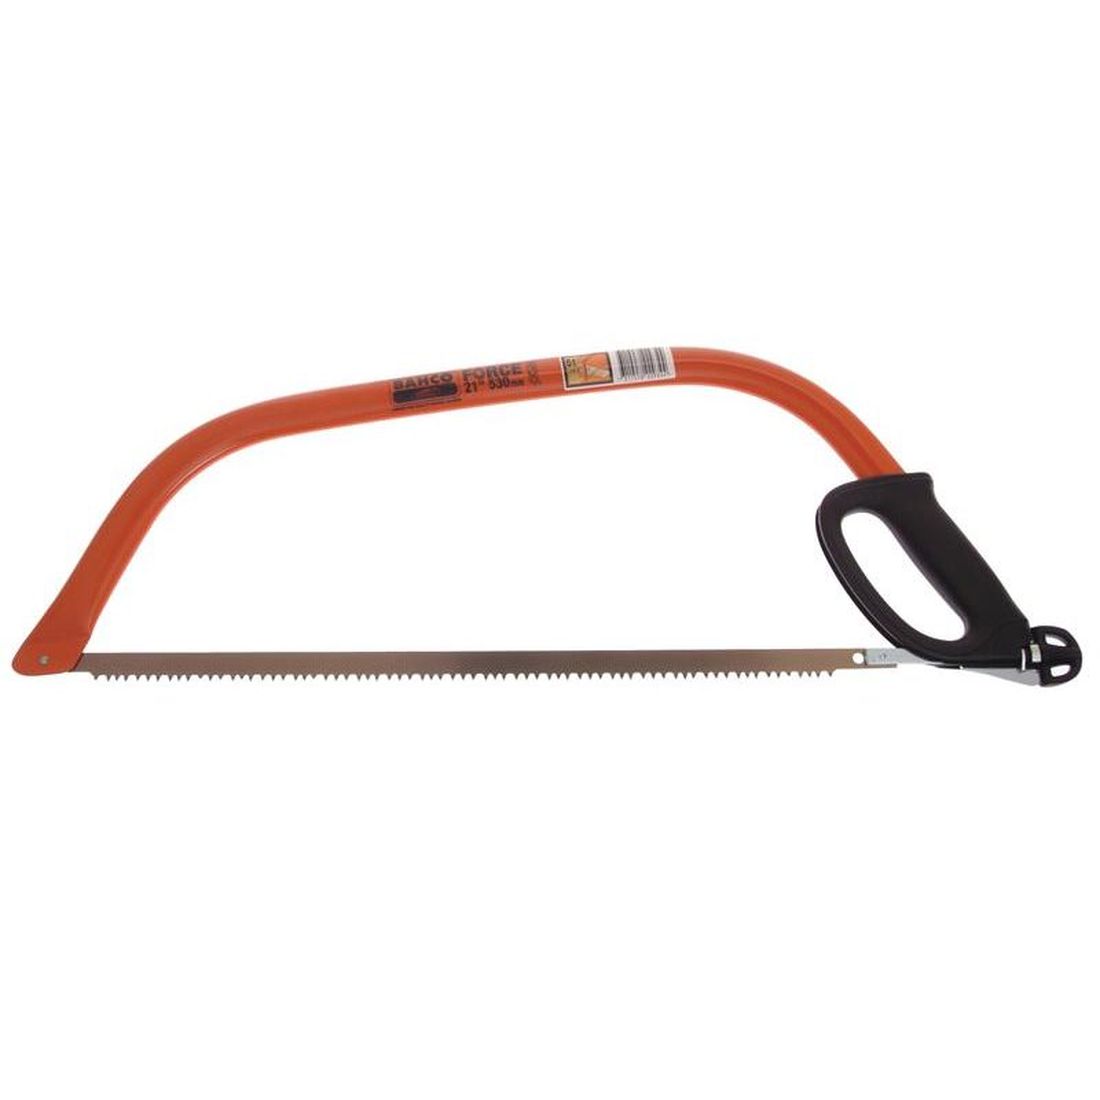 Bahco 10-30-23 Bowsaw 755mm (30in)      